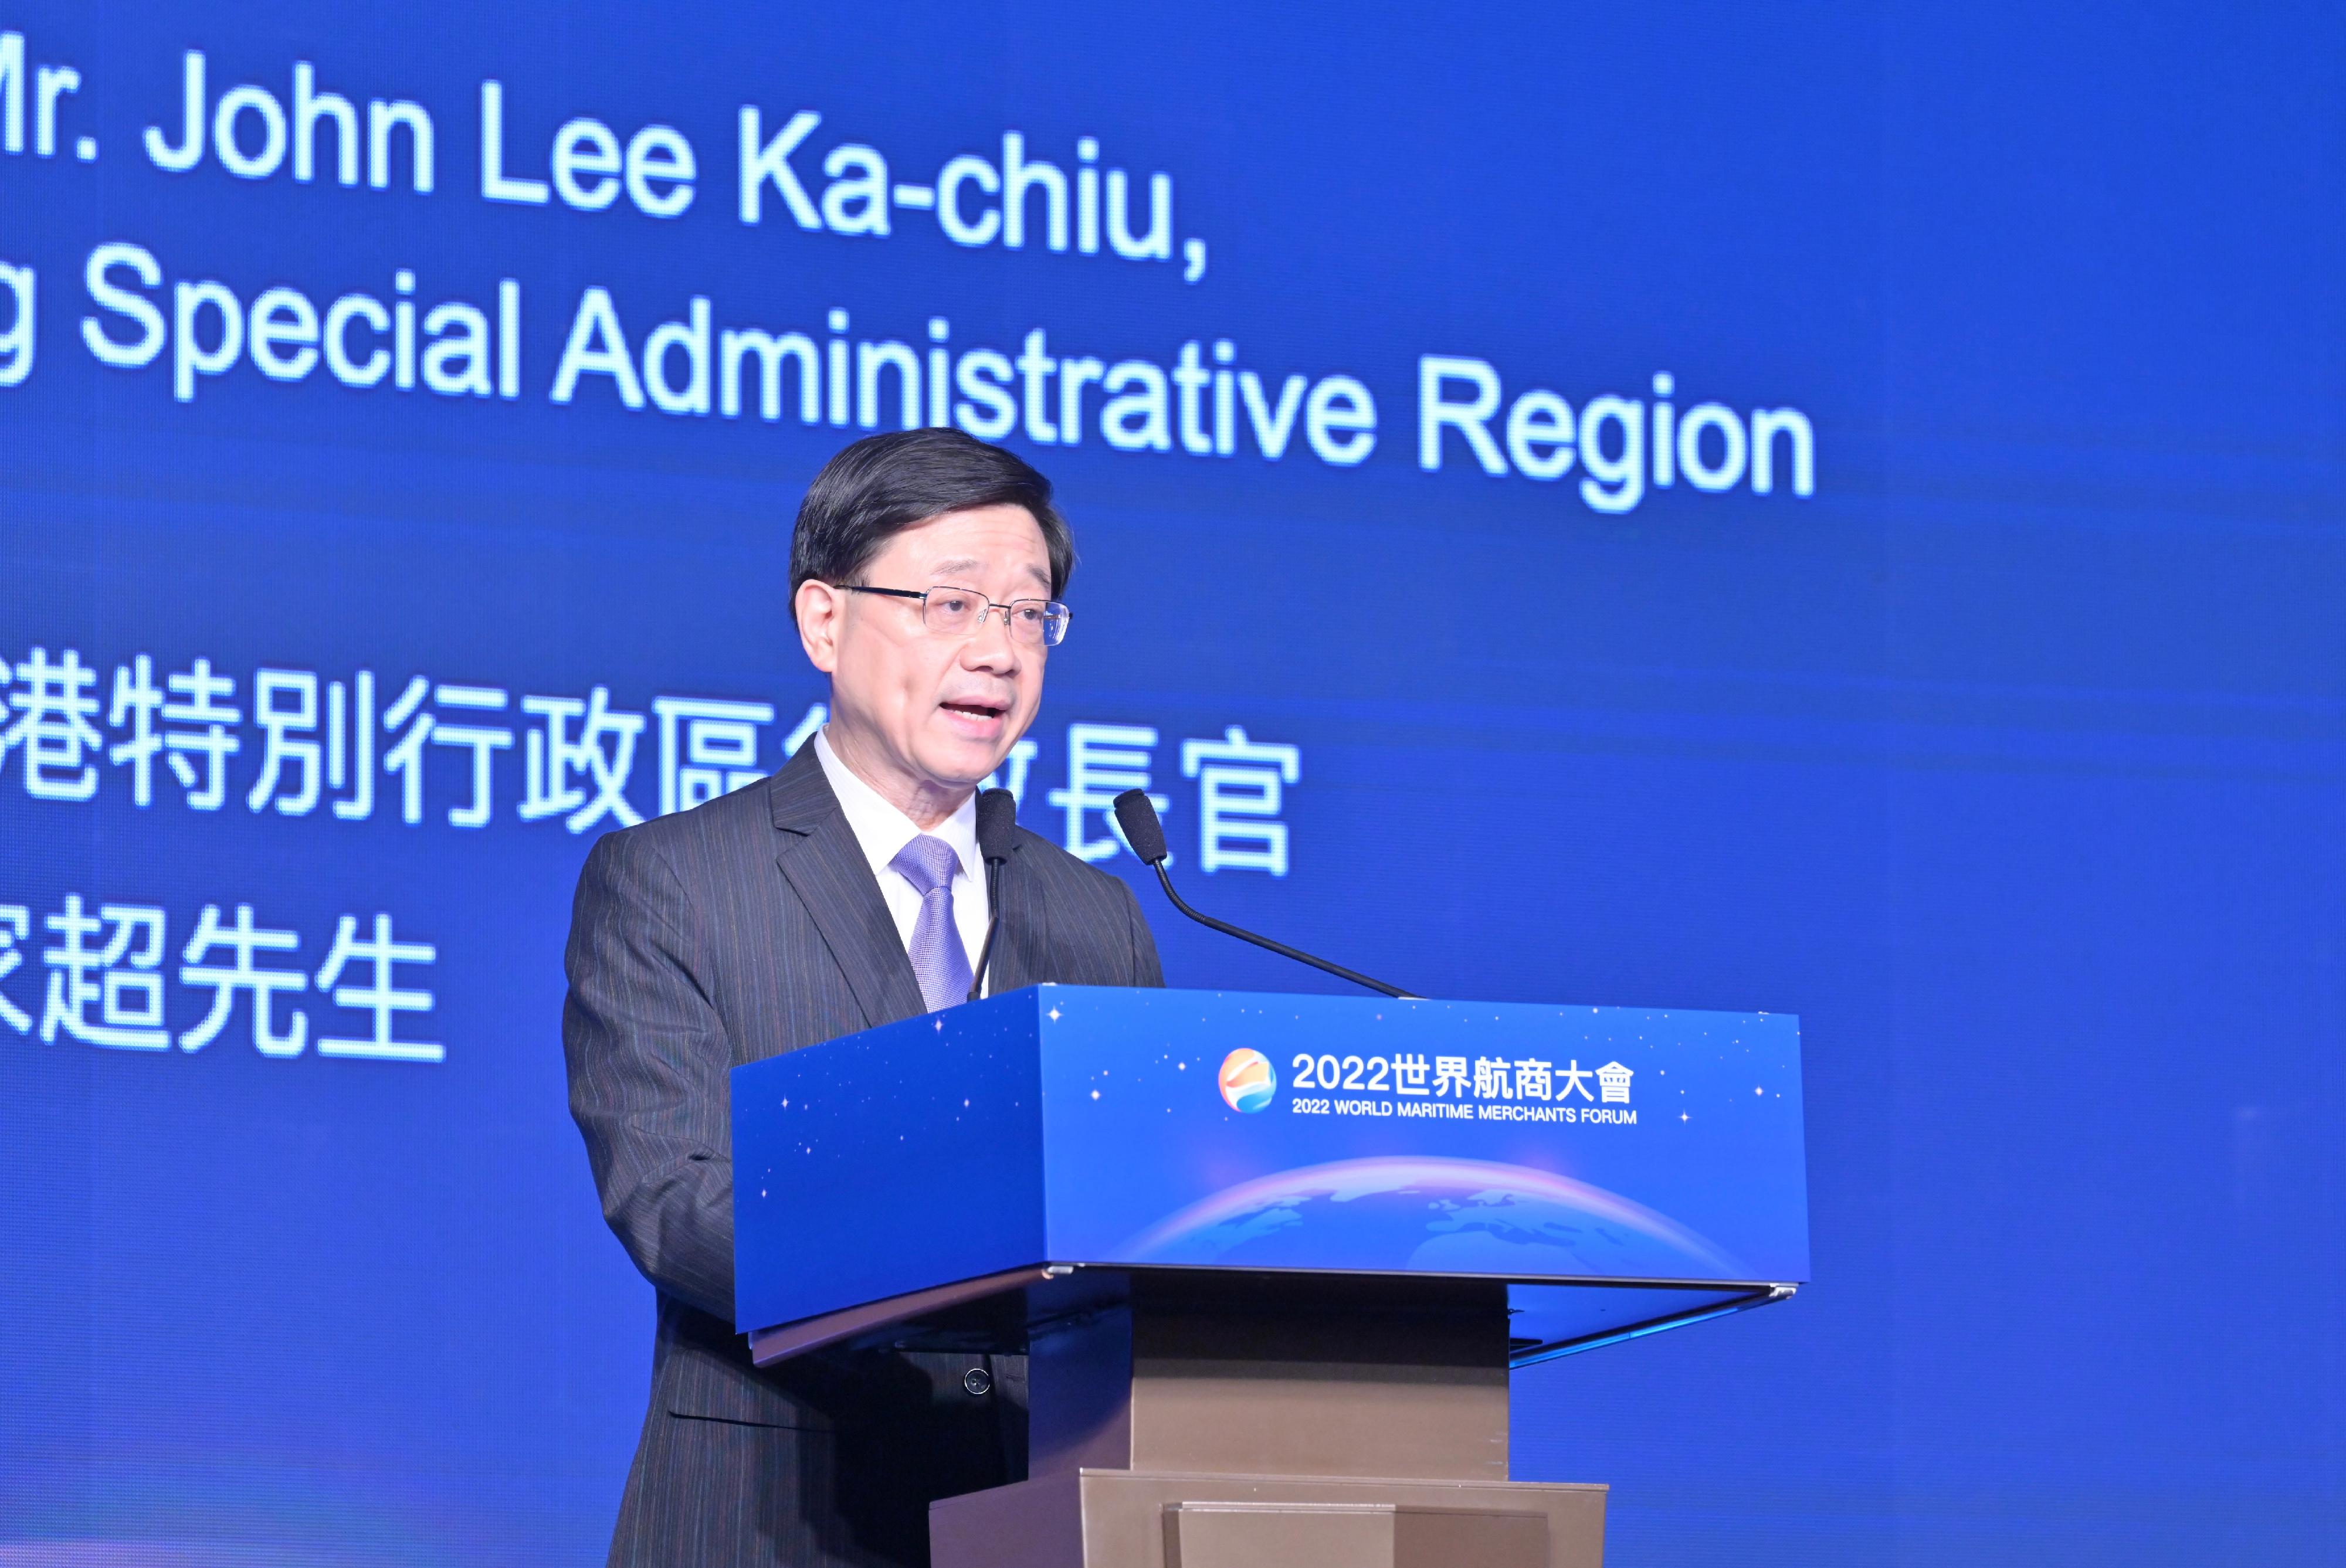 The Chief Executive, Mr John Lee, speaks at the 2022 World Maritime Merchants Forum today (November 15). 